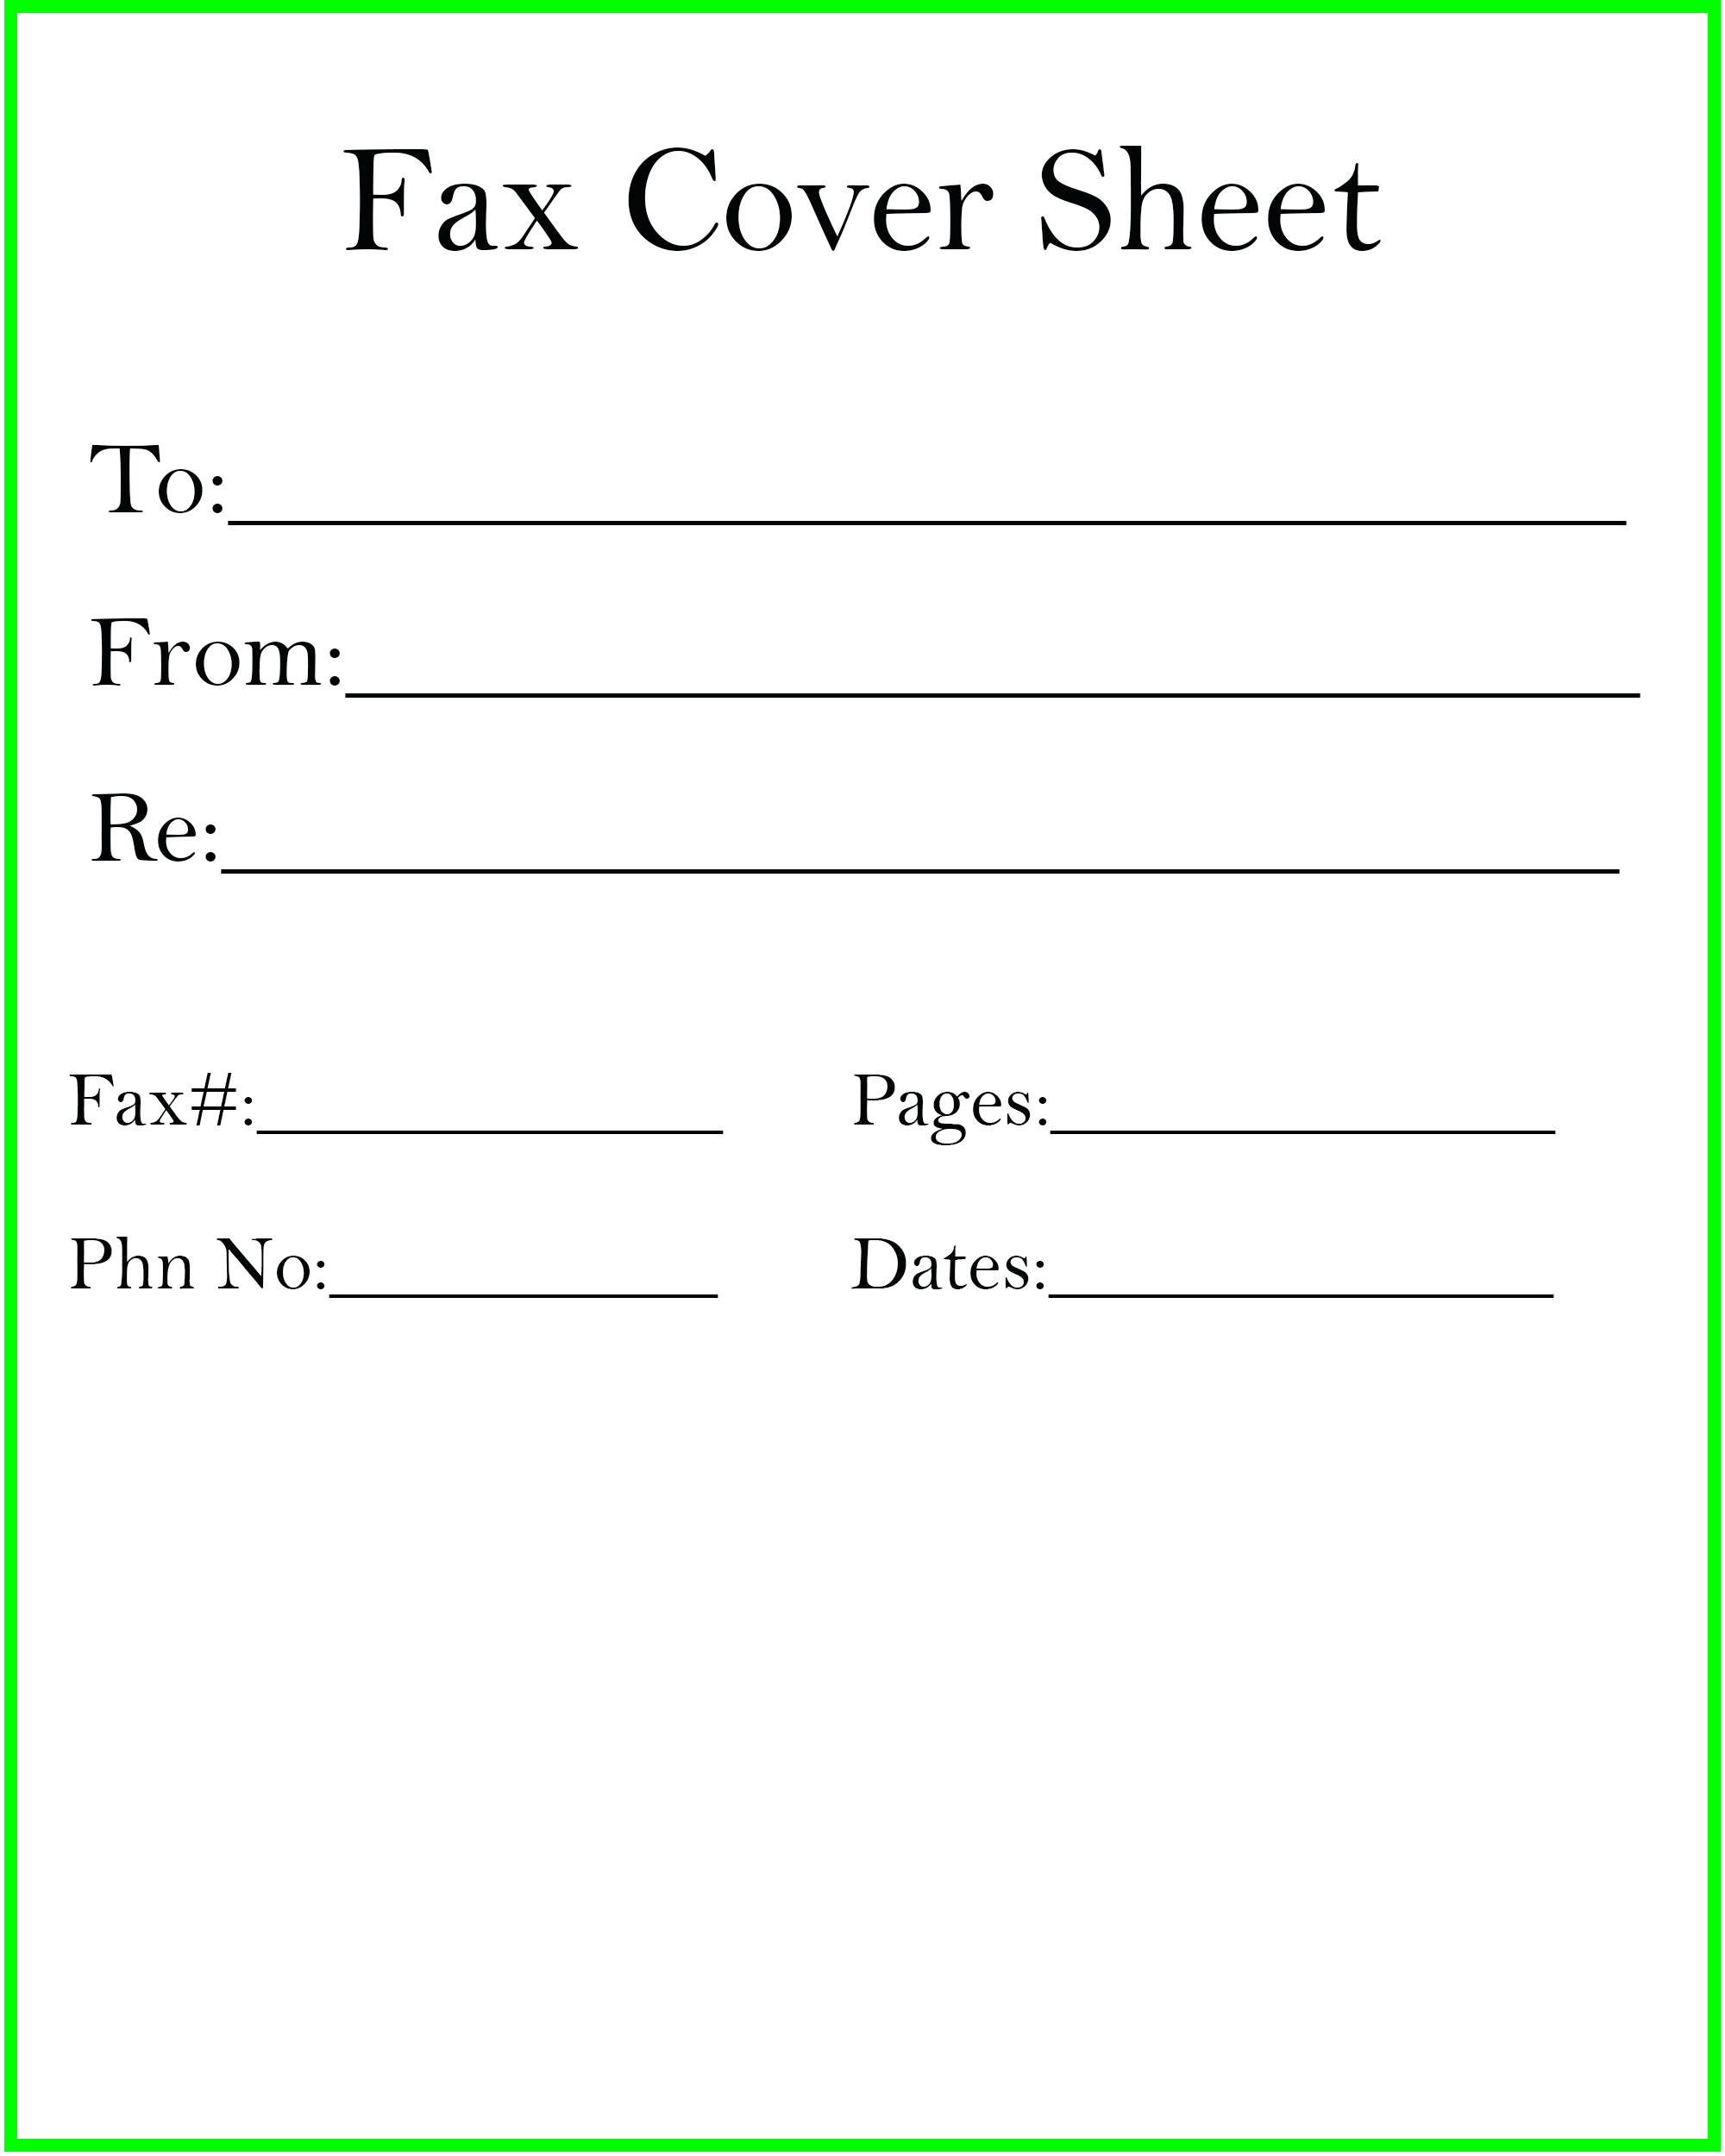 Free Fax Cover Sheet Template Pdf Word Google Docs in dimensions 2000 X 2500